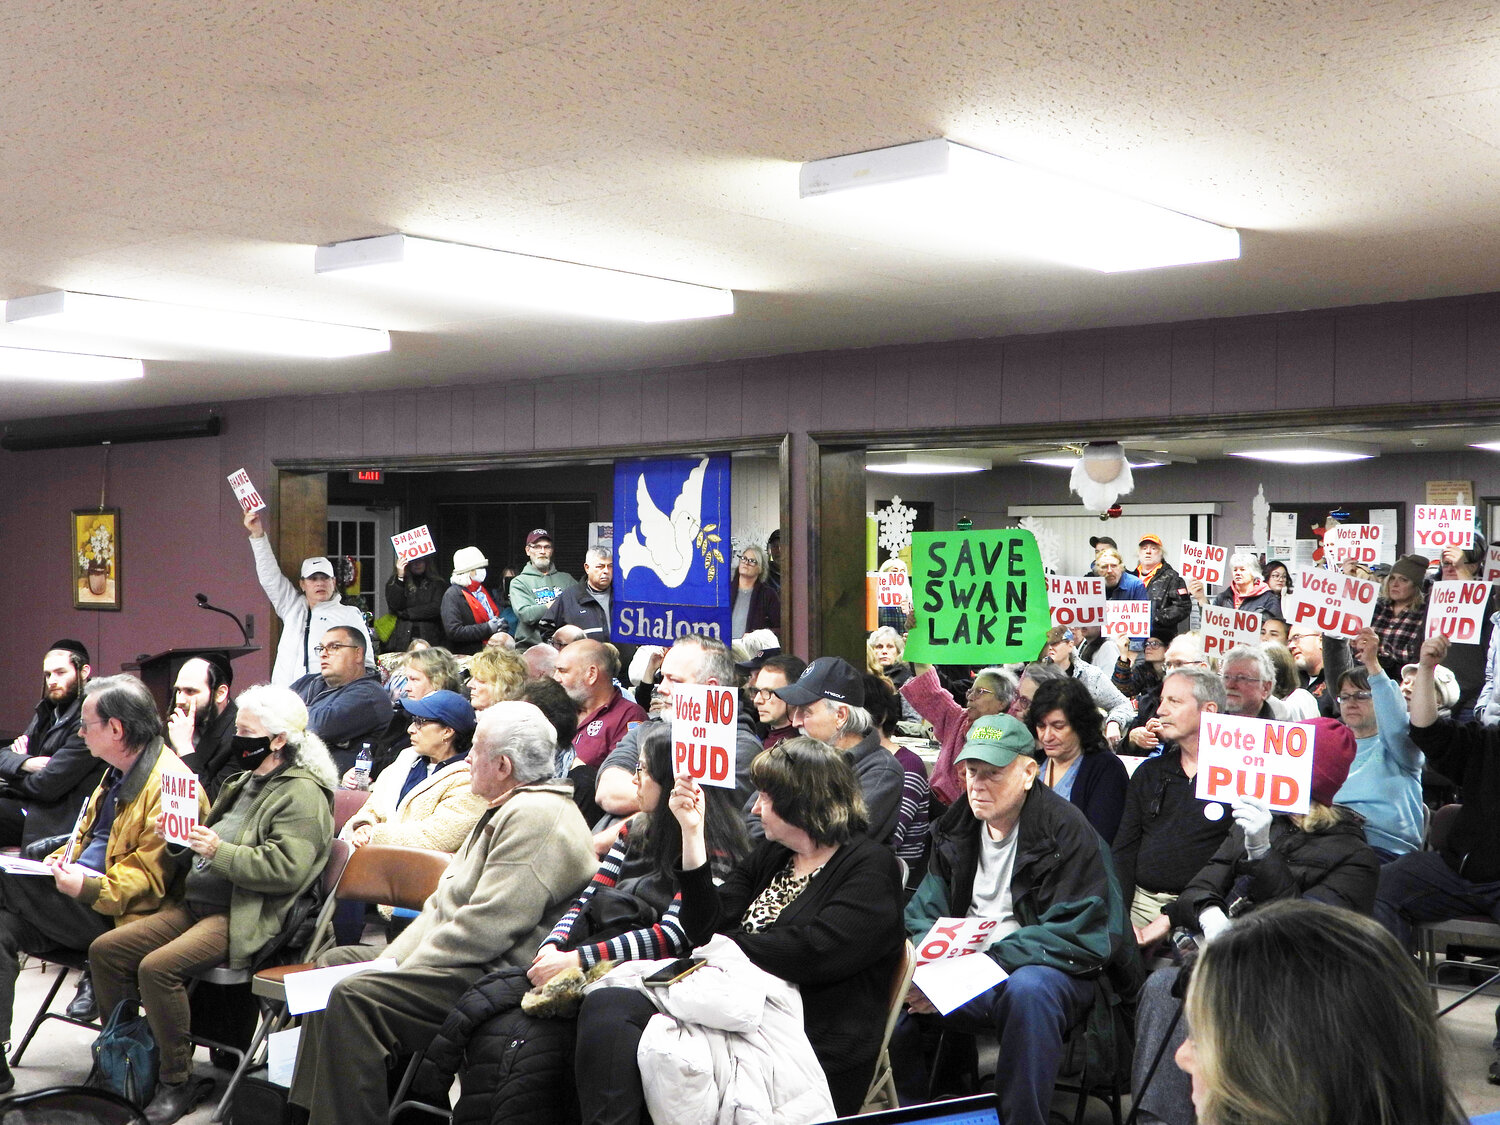 Dozens of concerned Liberty residents held up signs and displayed their disapproval for the proposed Lake Hills Estates Planned Use Development (PUD), which has since been denied by the Town Board by 3-2 vote in the wake of a three-month moratorium on PUD’s.